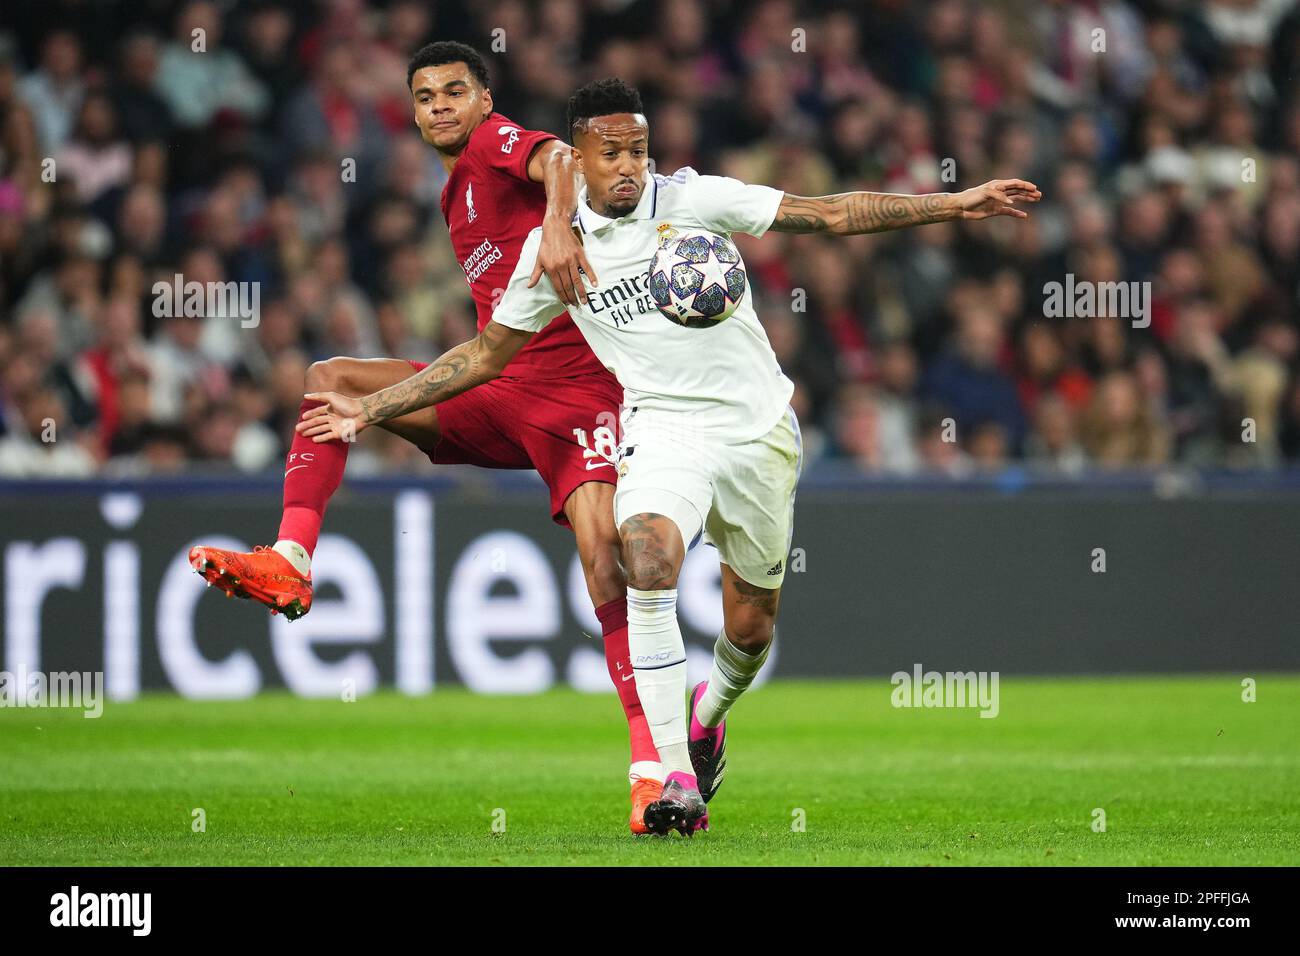 Eder Gabriel Militao of Real Madrid and Cody Gakpo of Liverpool FC during the UEFA Champions League match, round of 16, 2nd leg between Real Madrid and Liverpool FC played at Santiago Bernabeu Stadium on March 15, 2023 in Madrid, Spain. (Photo by Colas Buera / PRESSIN) Stock Photo